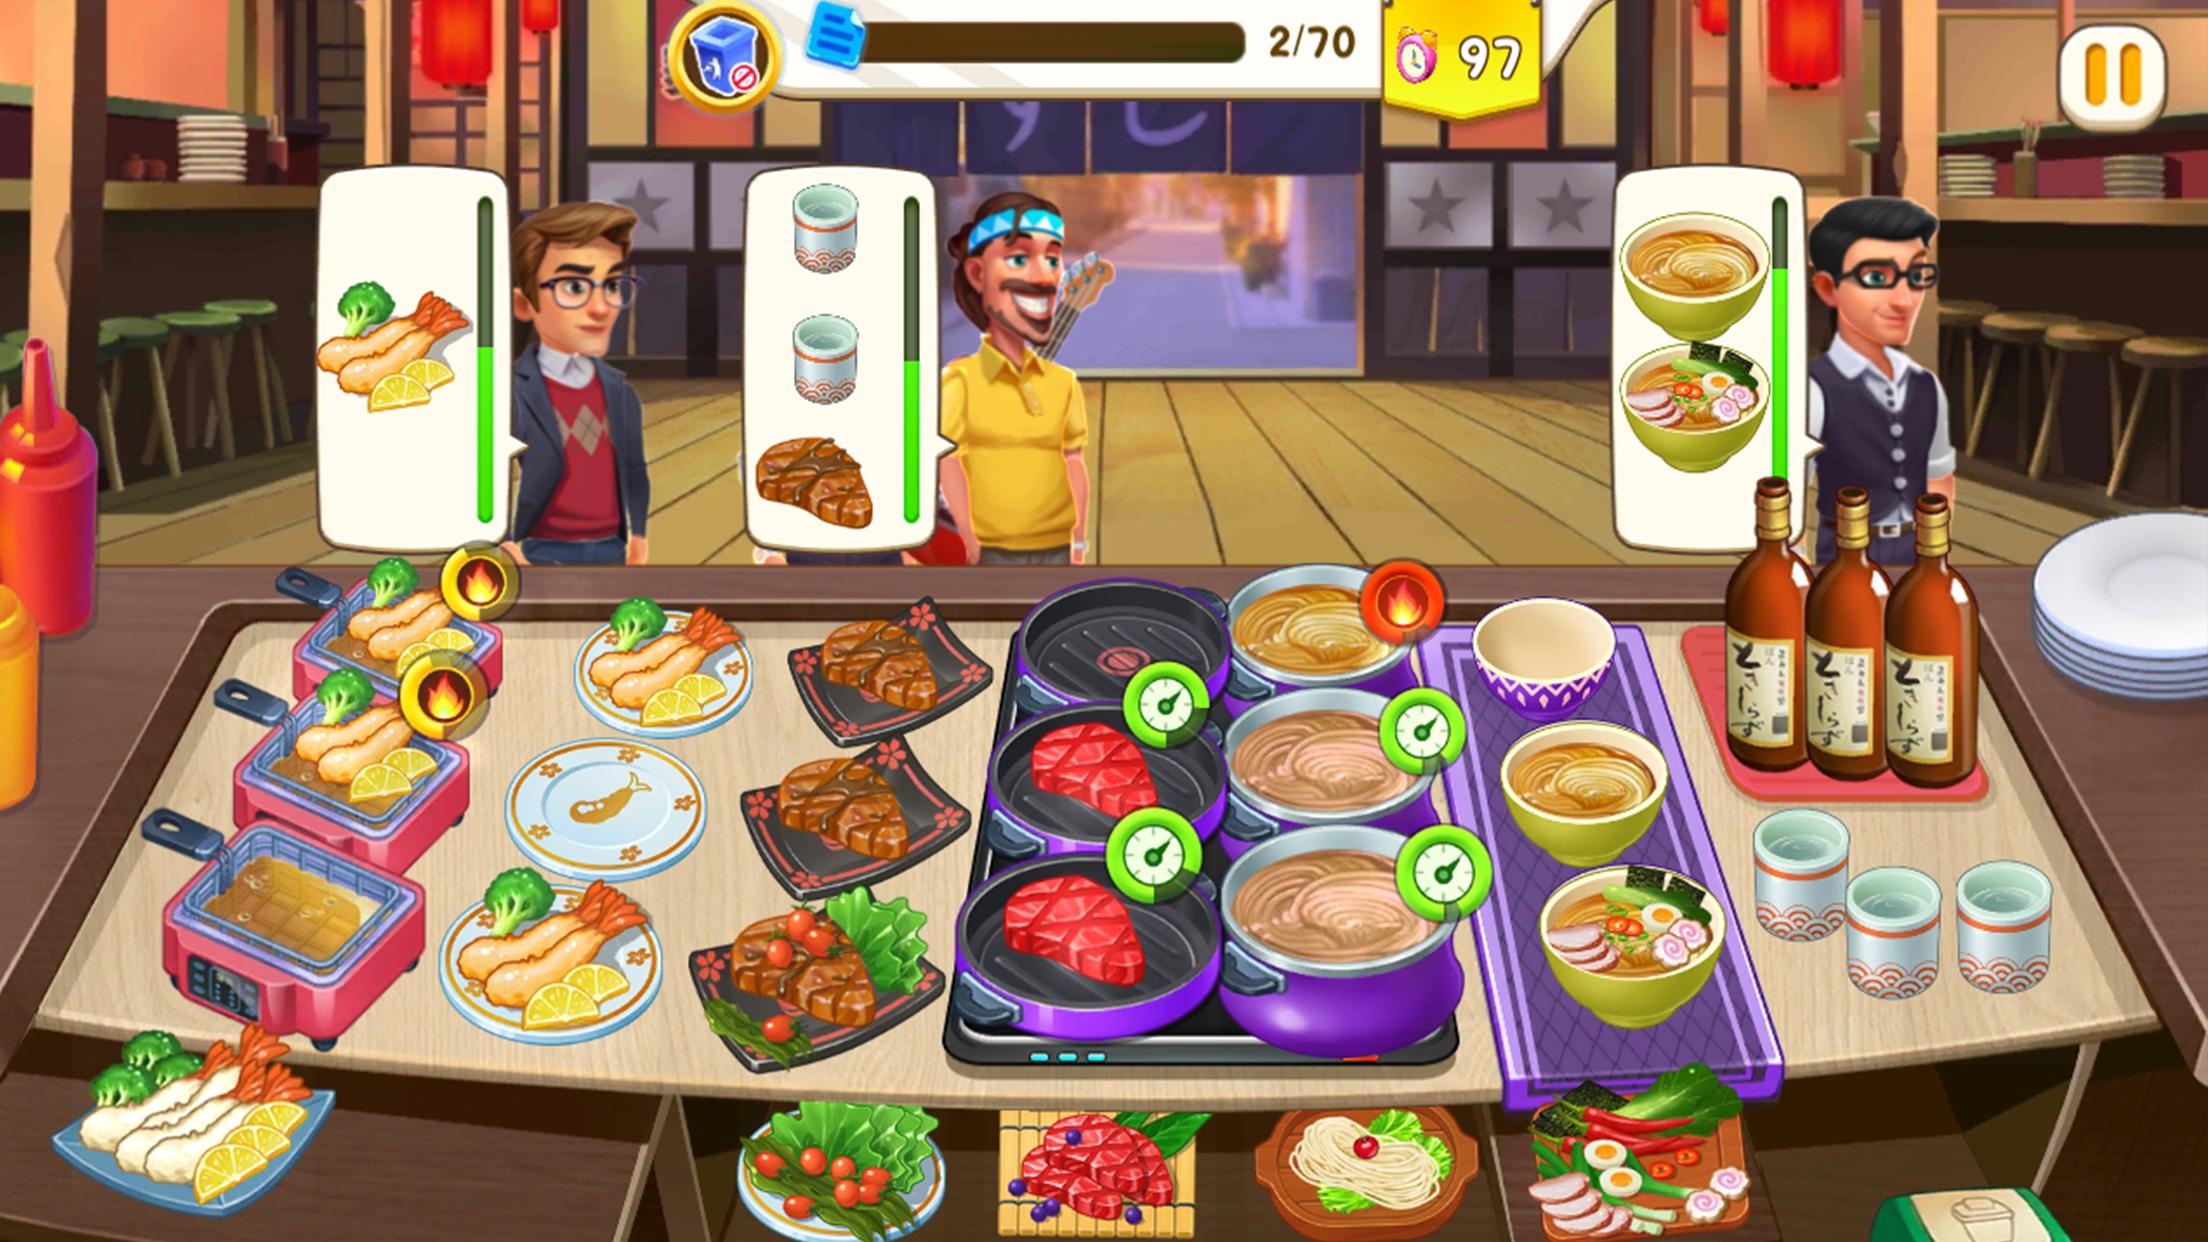 Cooking Rush Bake it to delicious 2.1.2 Screenshot 2